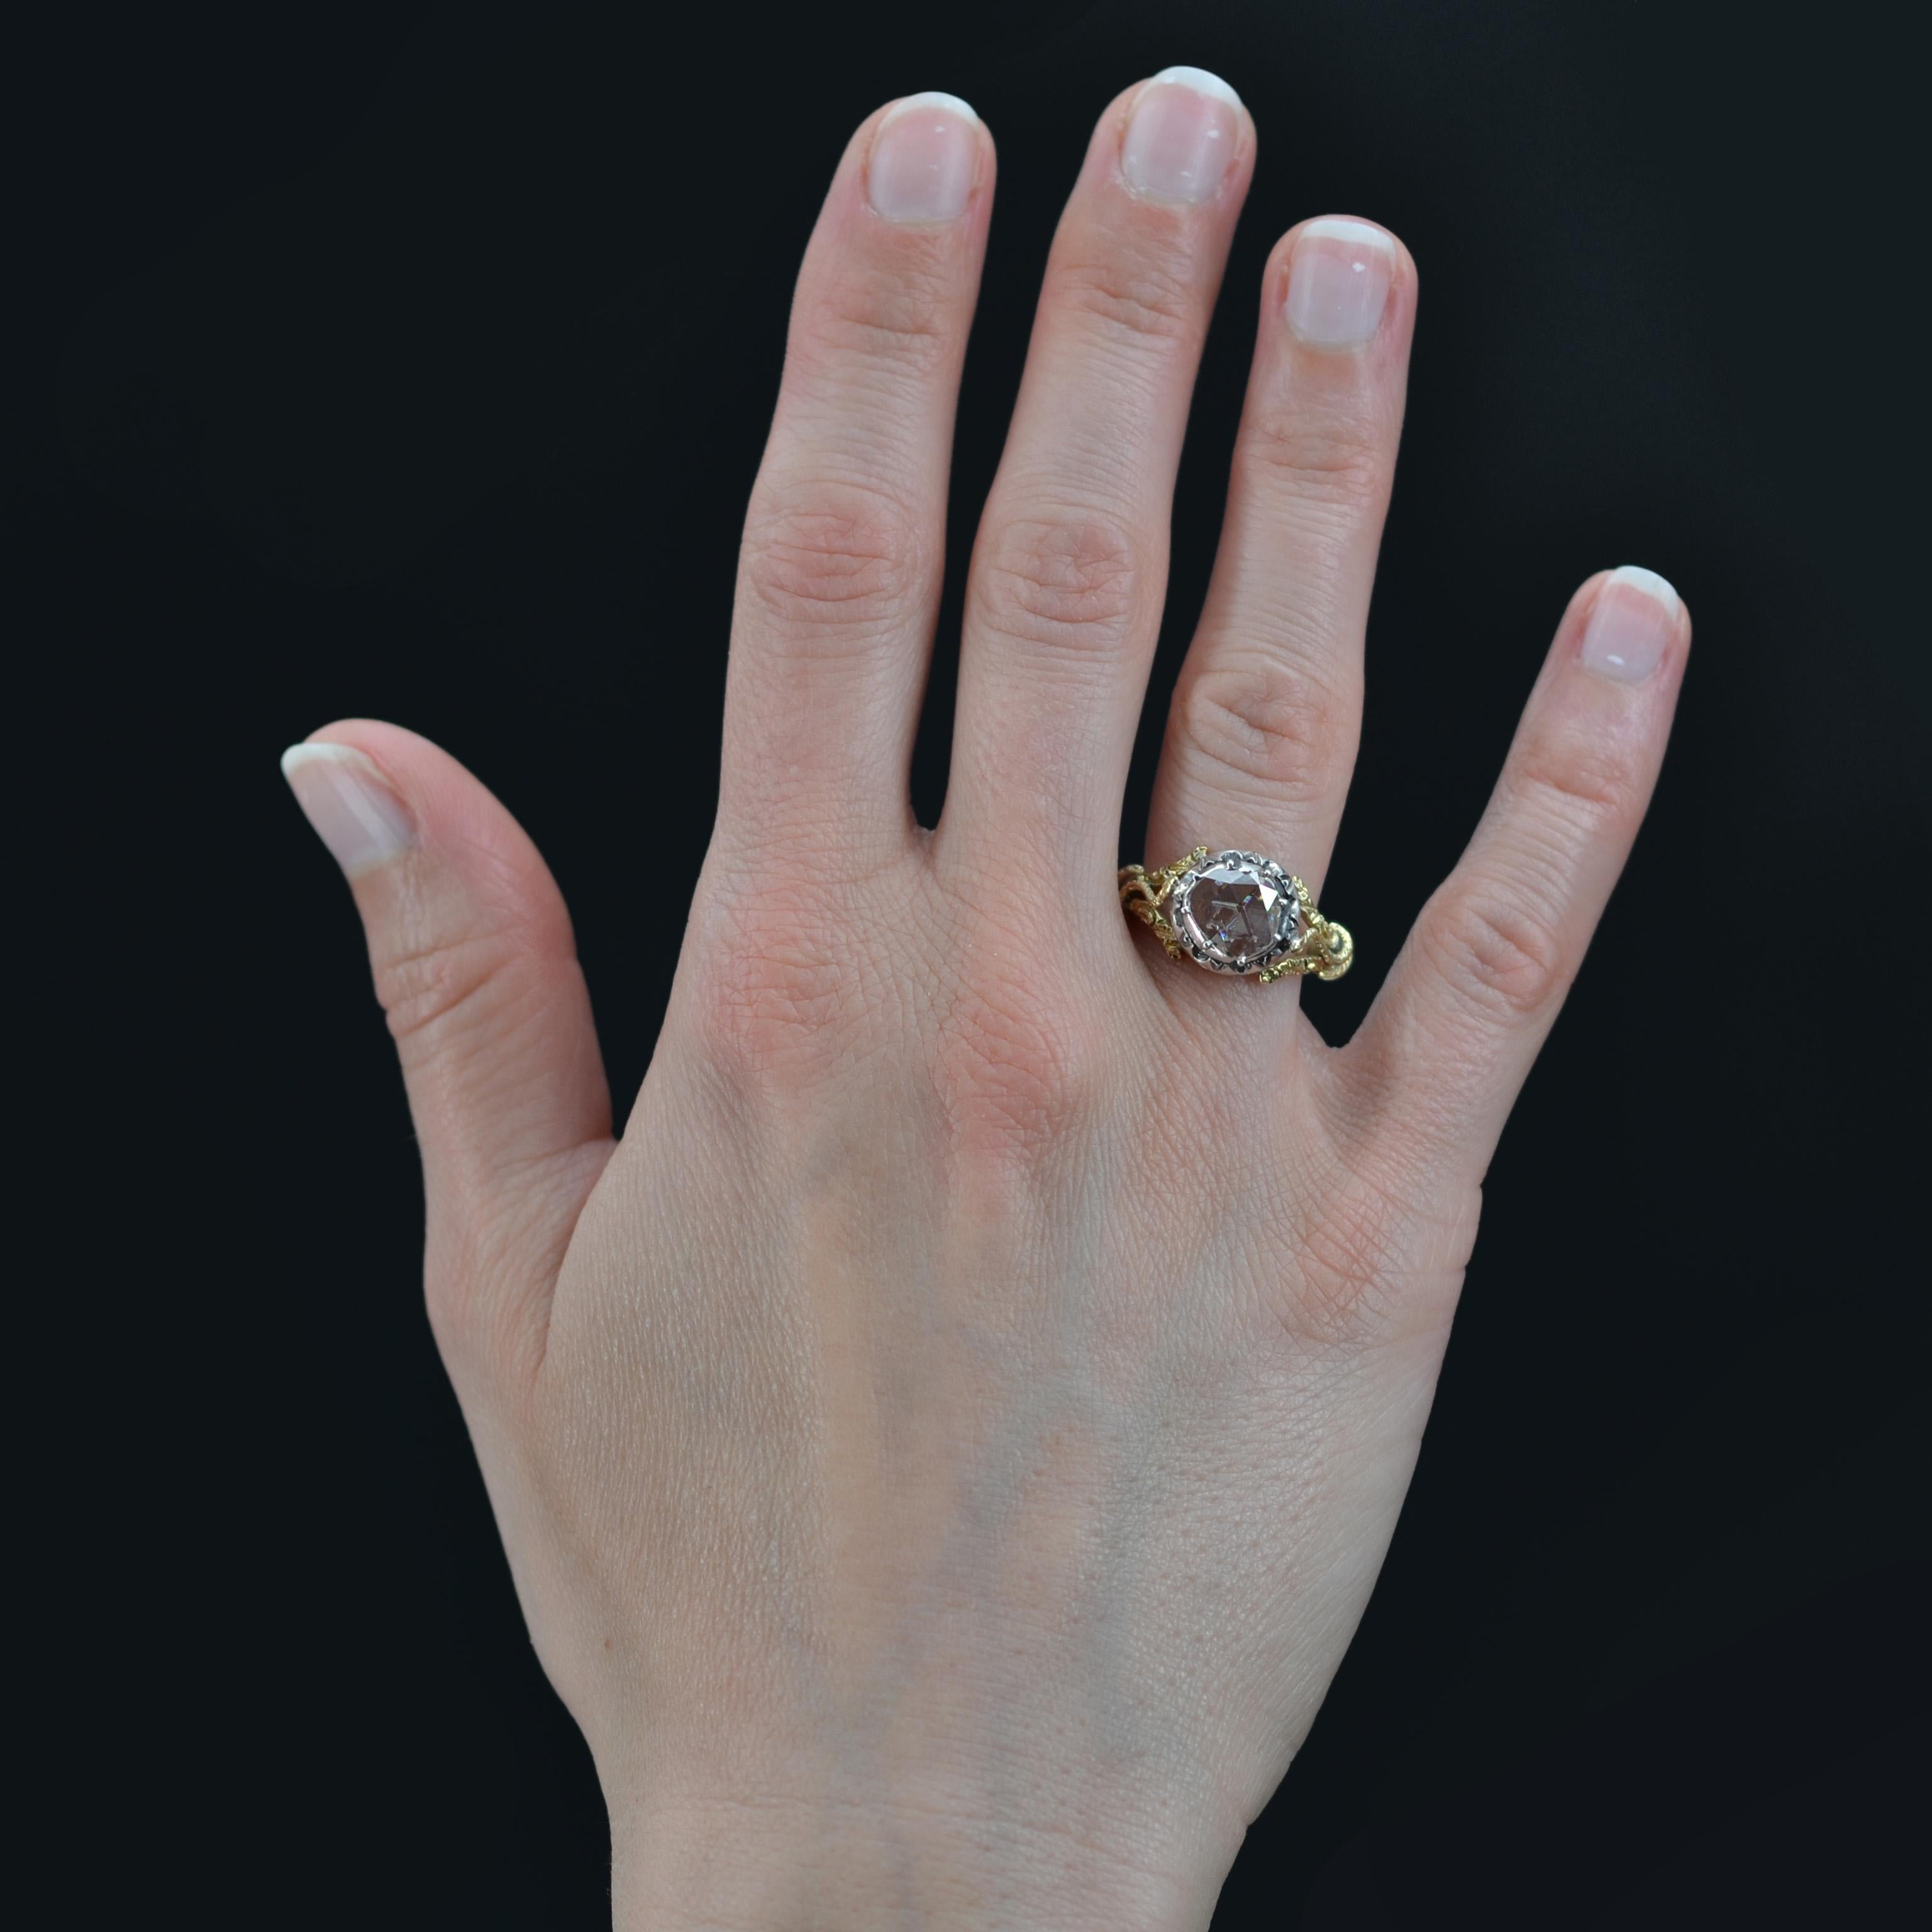 Ring in 18 karat yellow gold.
Antique ring, it is closed set on its top of an important rose- cut diamond. The setting is delicately chased and the departure of the ring presents a winding of chased gold threads.
Weight of the diamond : 0,74 carat